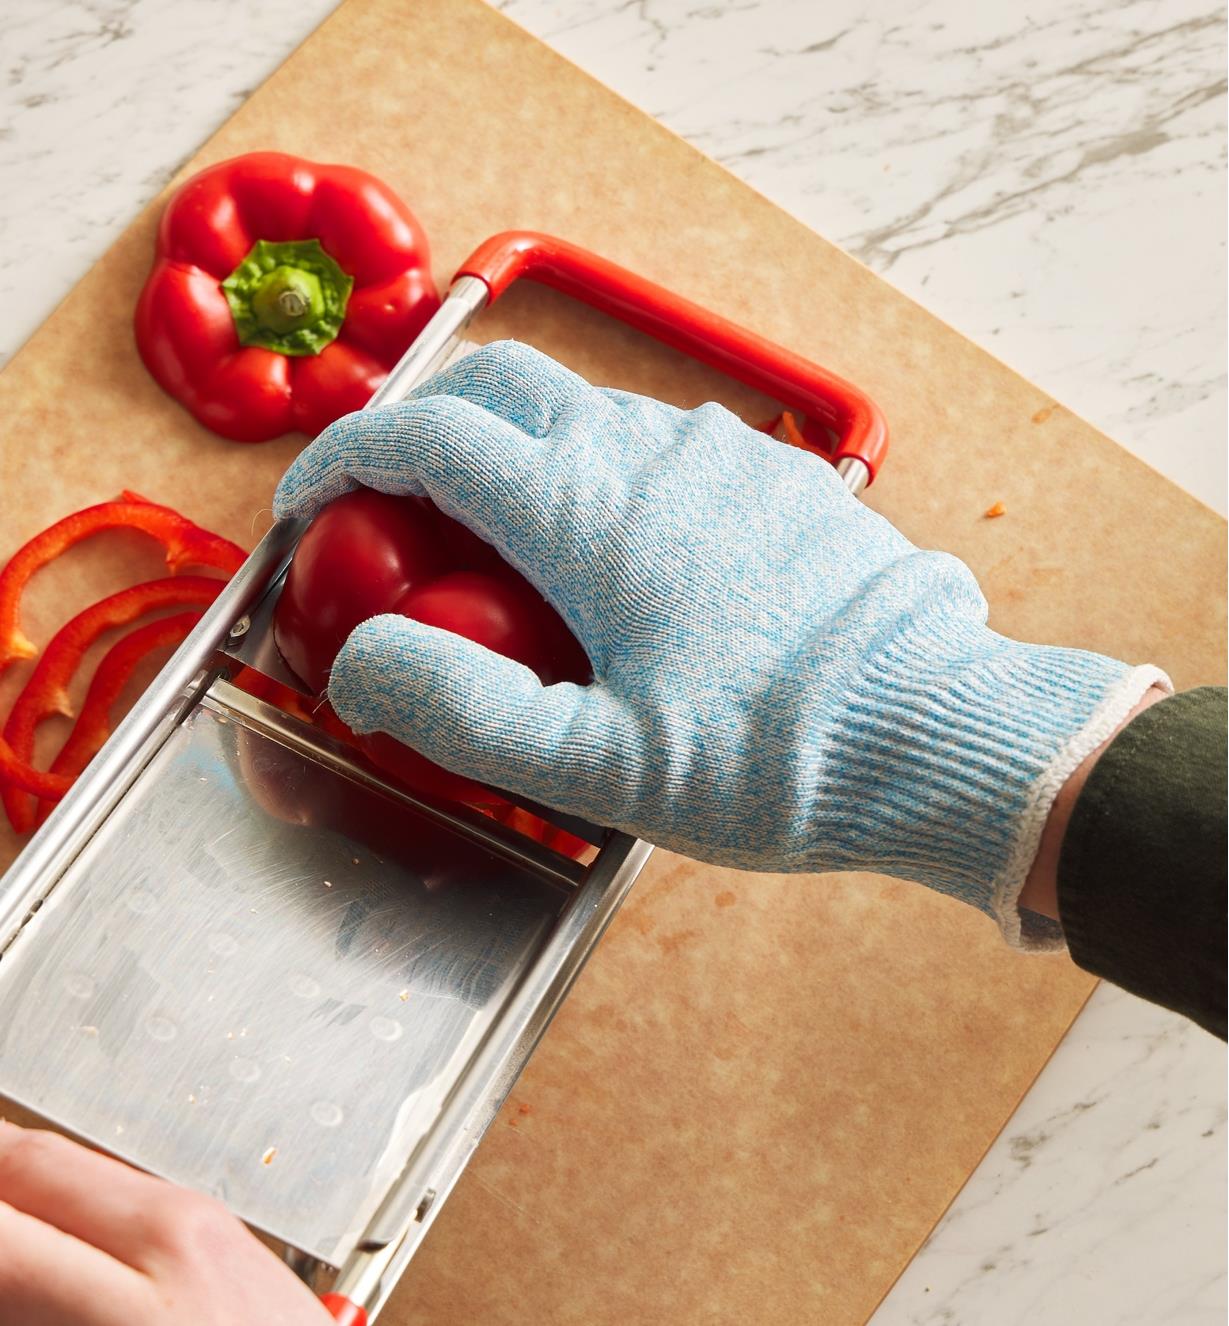 A gloved hand slices a red pepper on a mandoline